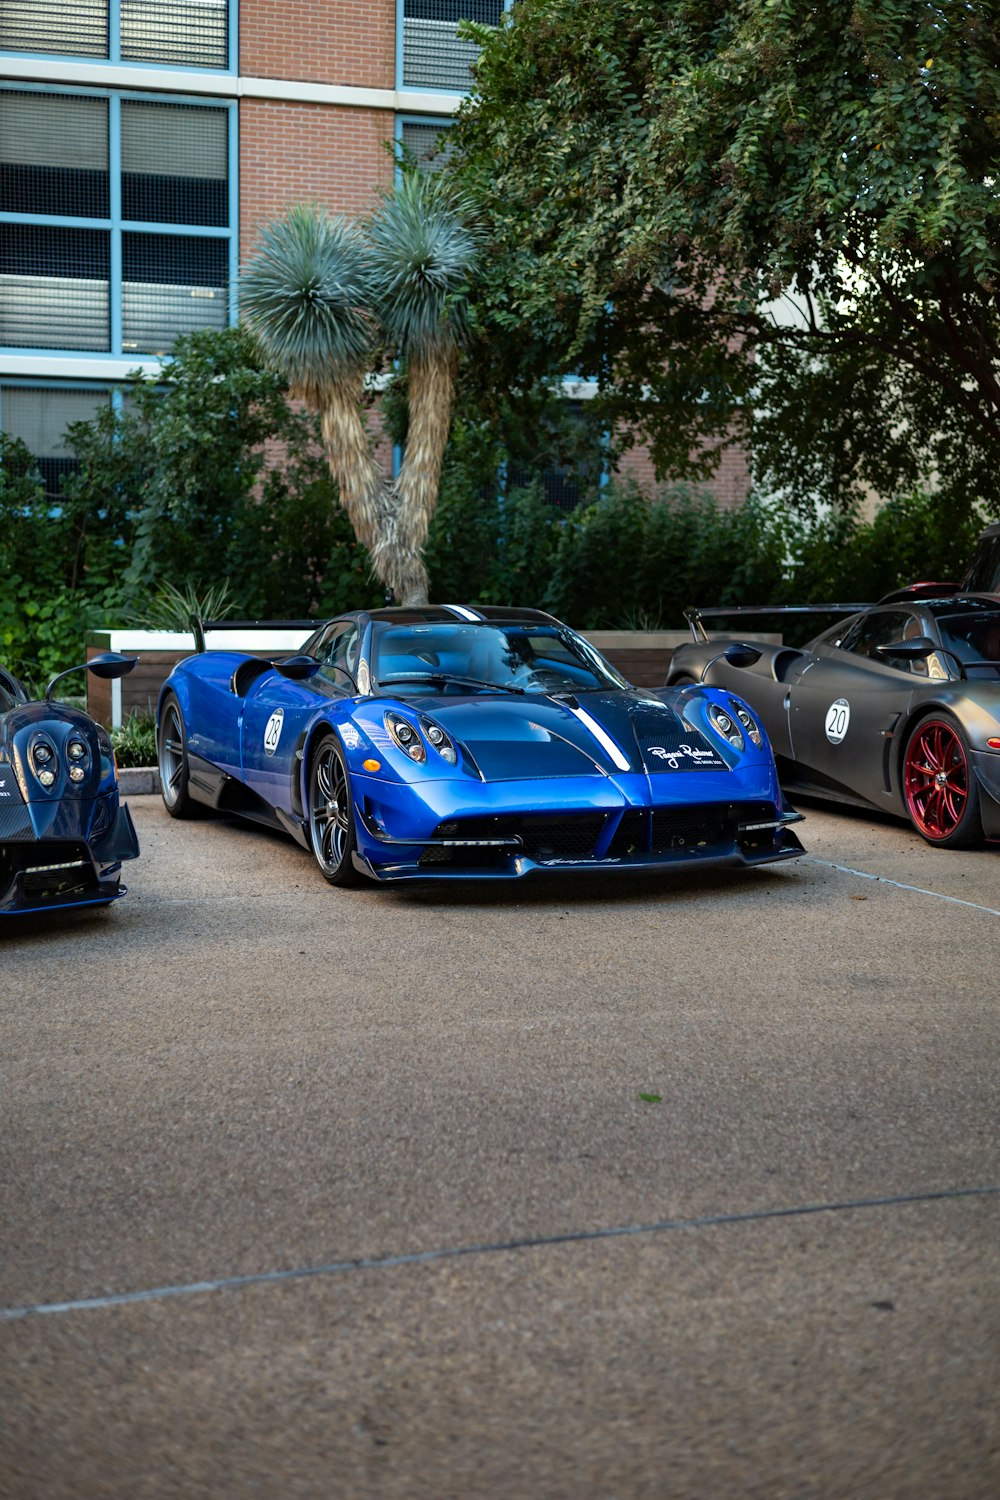 three blue sports cars parked in a parking lot